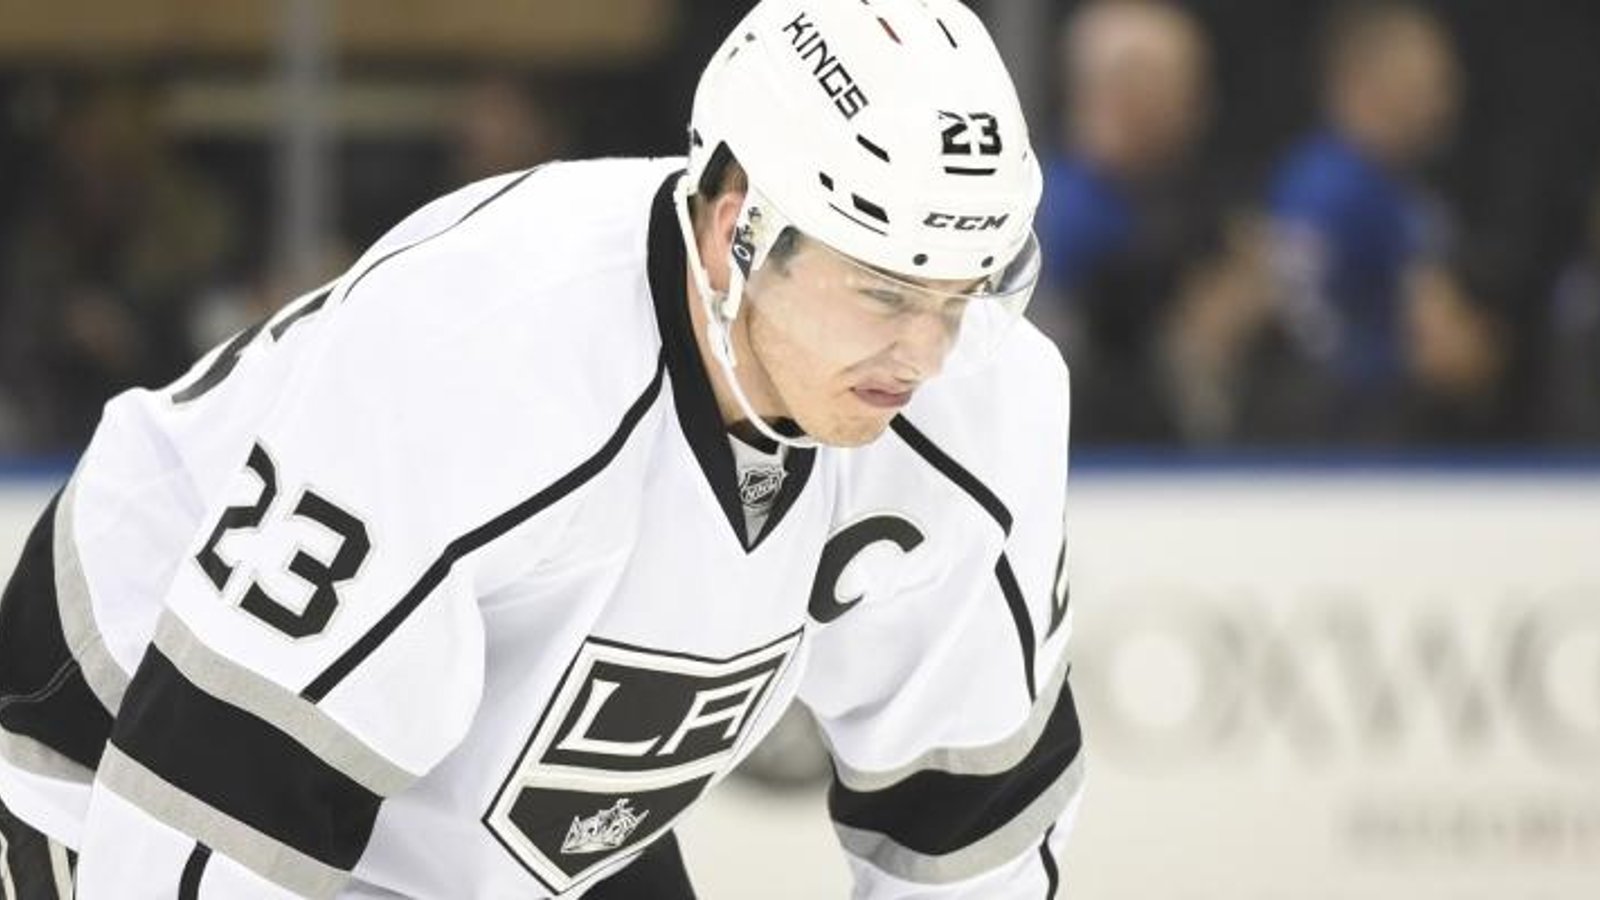 Report: L.A. Kings have named their new captain after stripping Brown of the “C.”